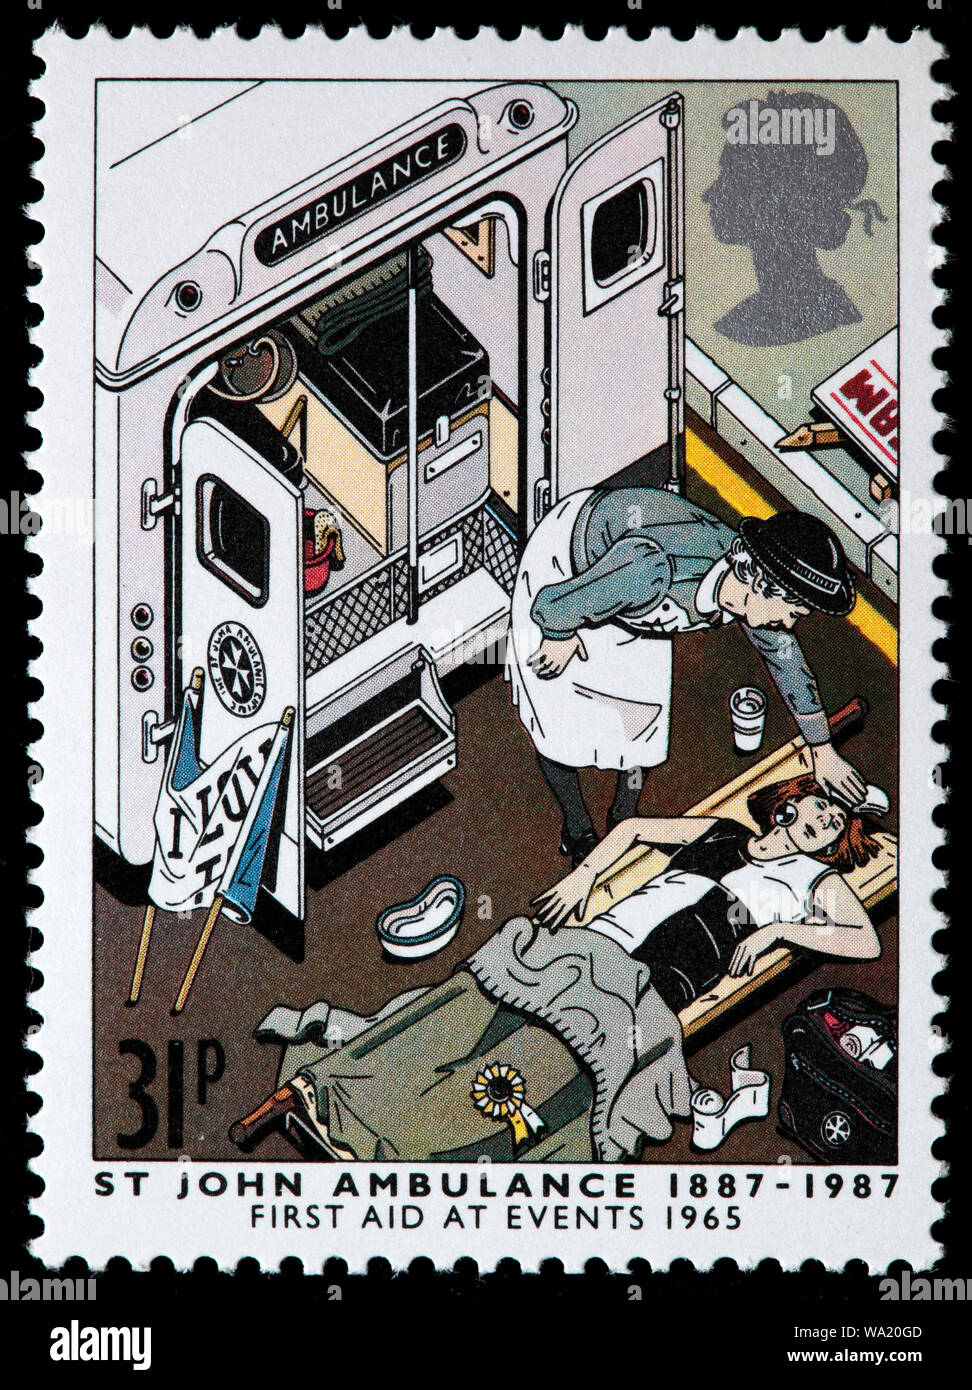 St. Johns Ambulance Brigade, first aid at events, 1965, postage stamp, UK, 1987 Stock Photo